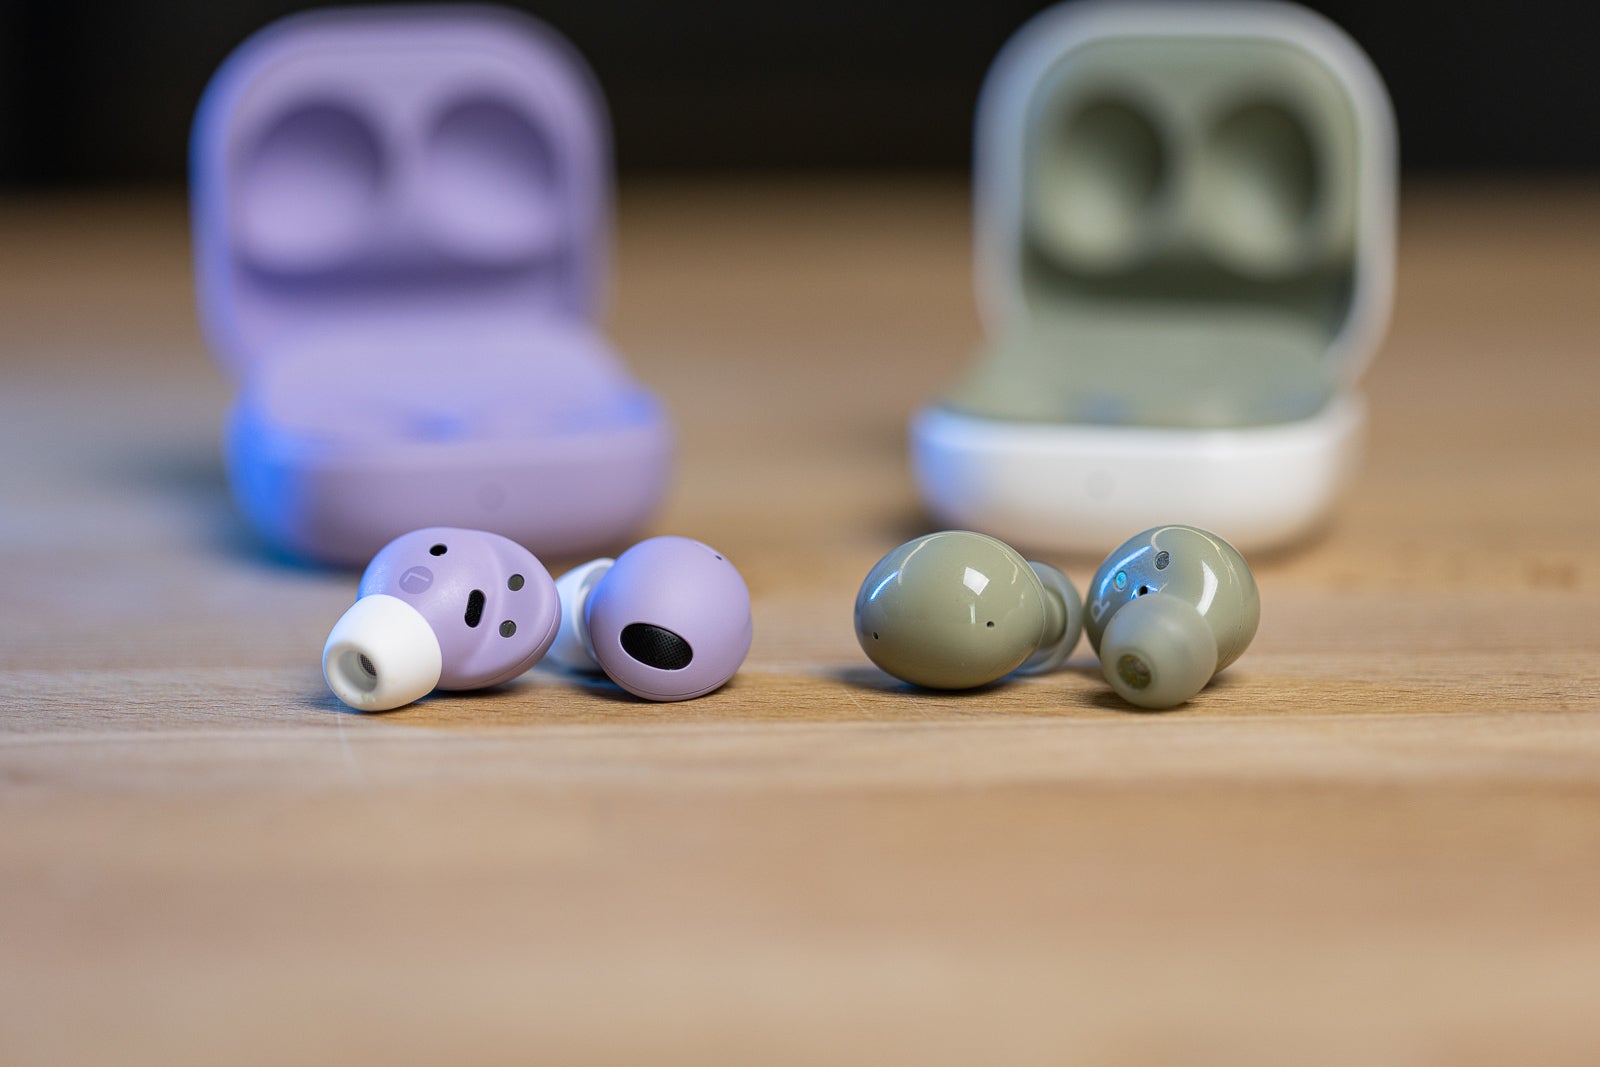 (Image credit - PhoneArena) Galaxy Buds 2 Pro (left) and Galaxy Buds 2 (right) - Galaxy Buds 2 Pro vs Galaxy Buds 2: Can you hear the difference?  Or even see it?